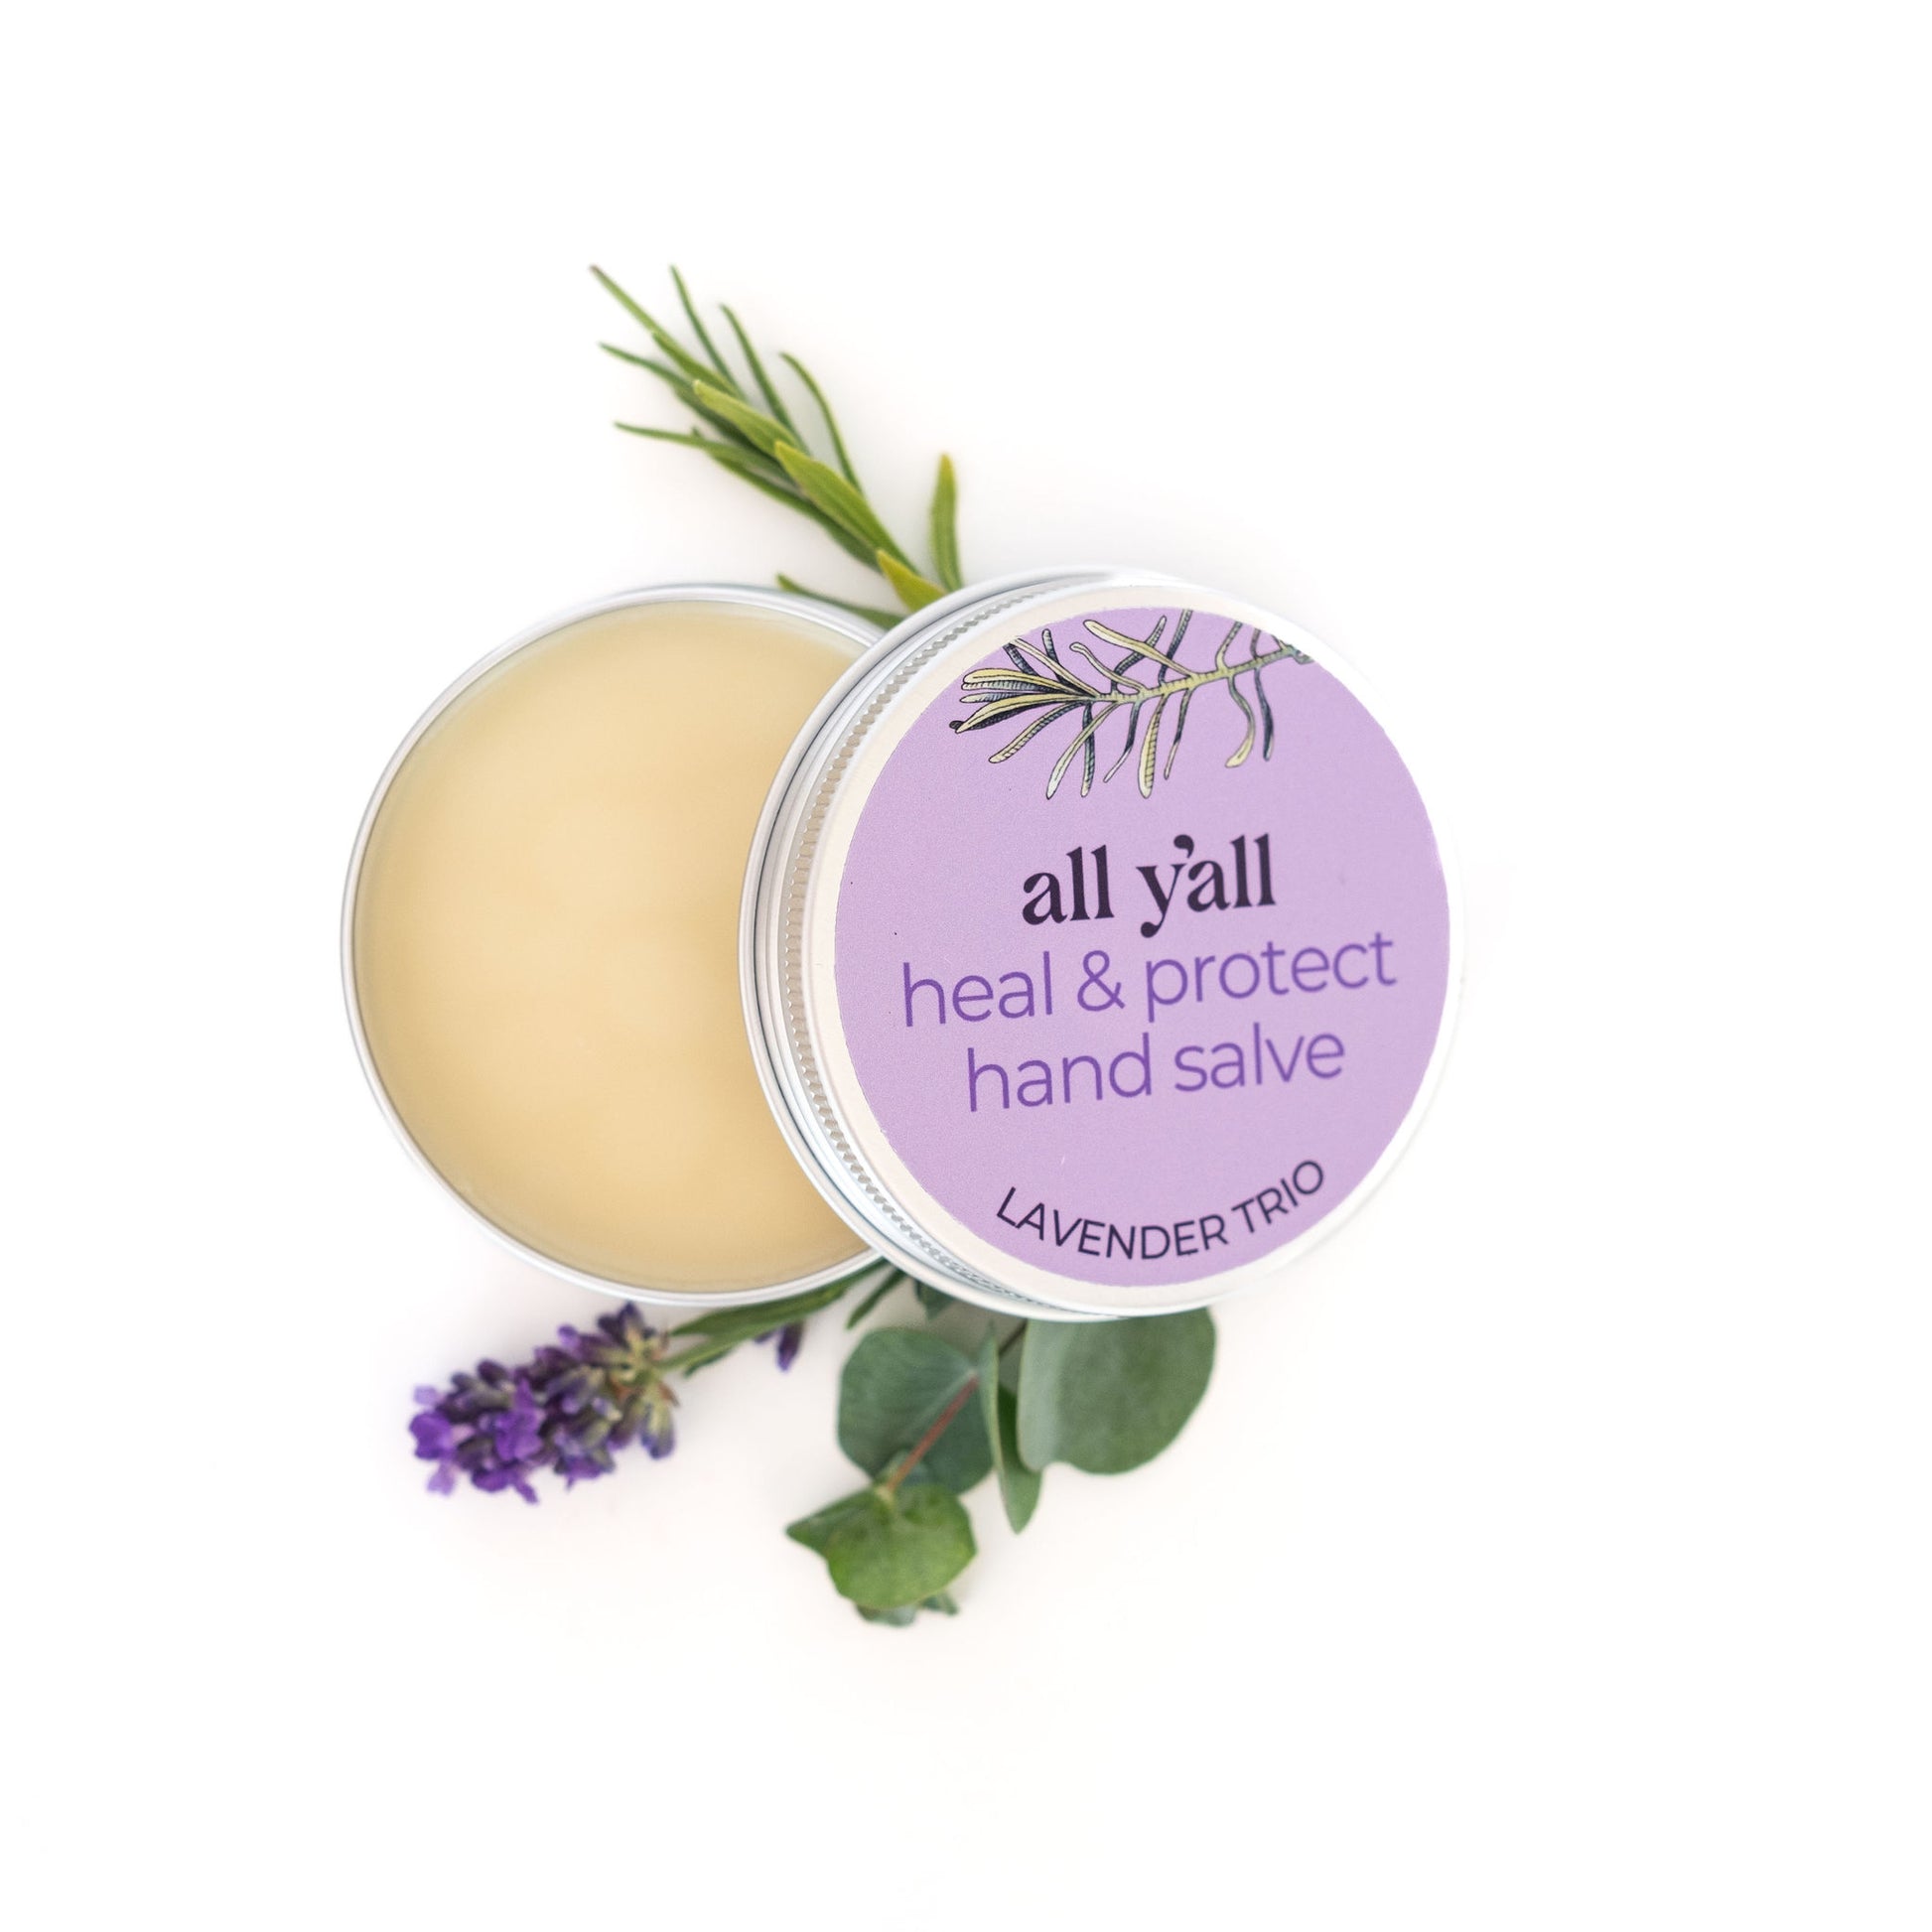 A soothing salve crafted from healing oils like coconut and olive, designed to provide protection and care | All Y'all Skincare